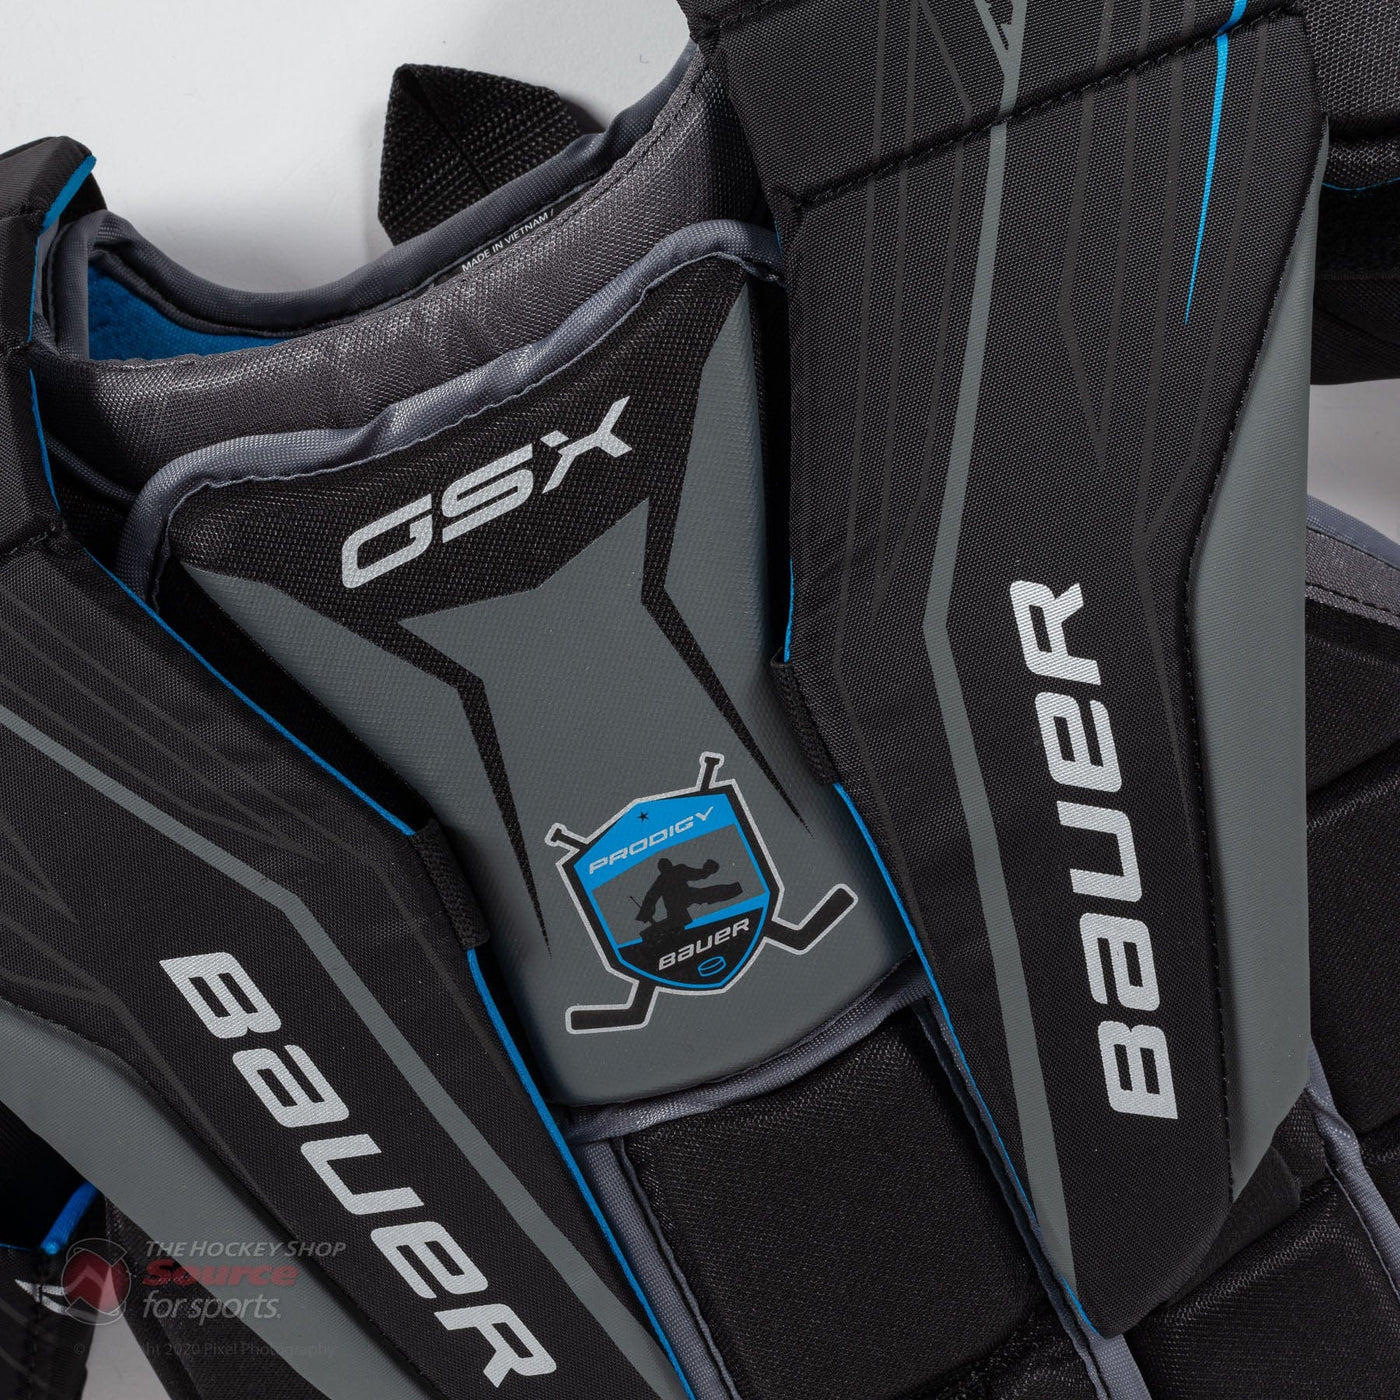 Bauer GSX Prodigy Youth Chest & Arm Protector